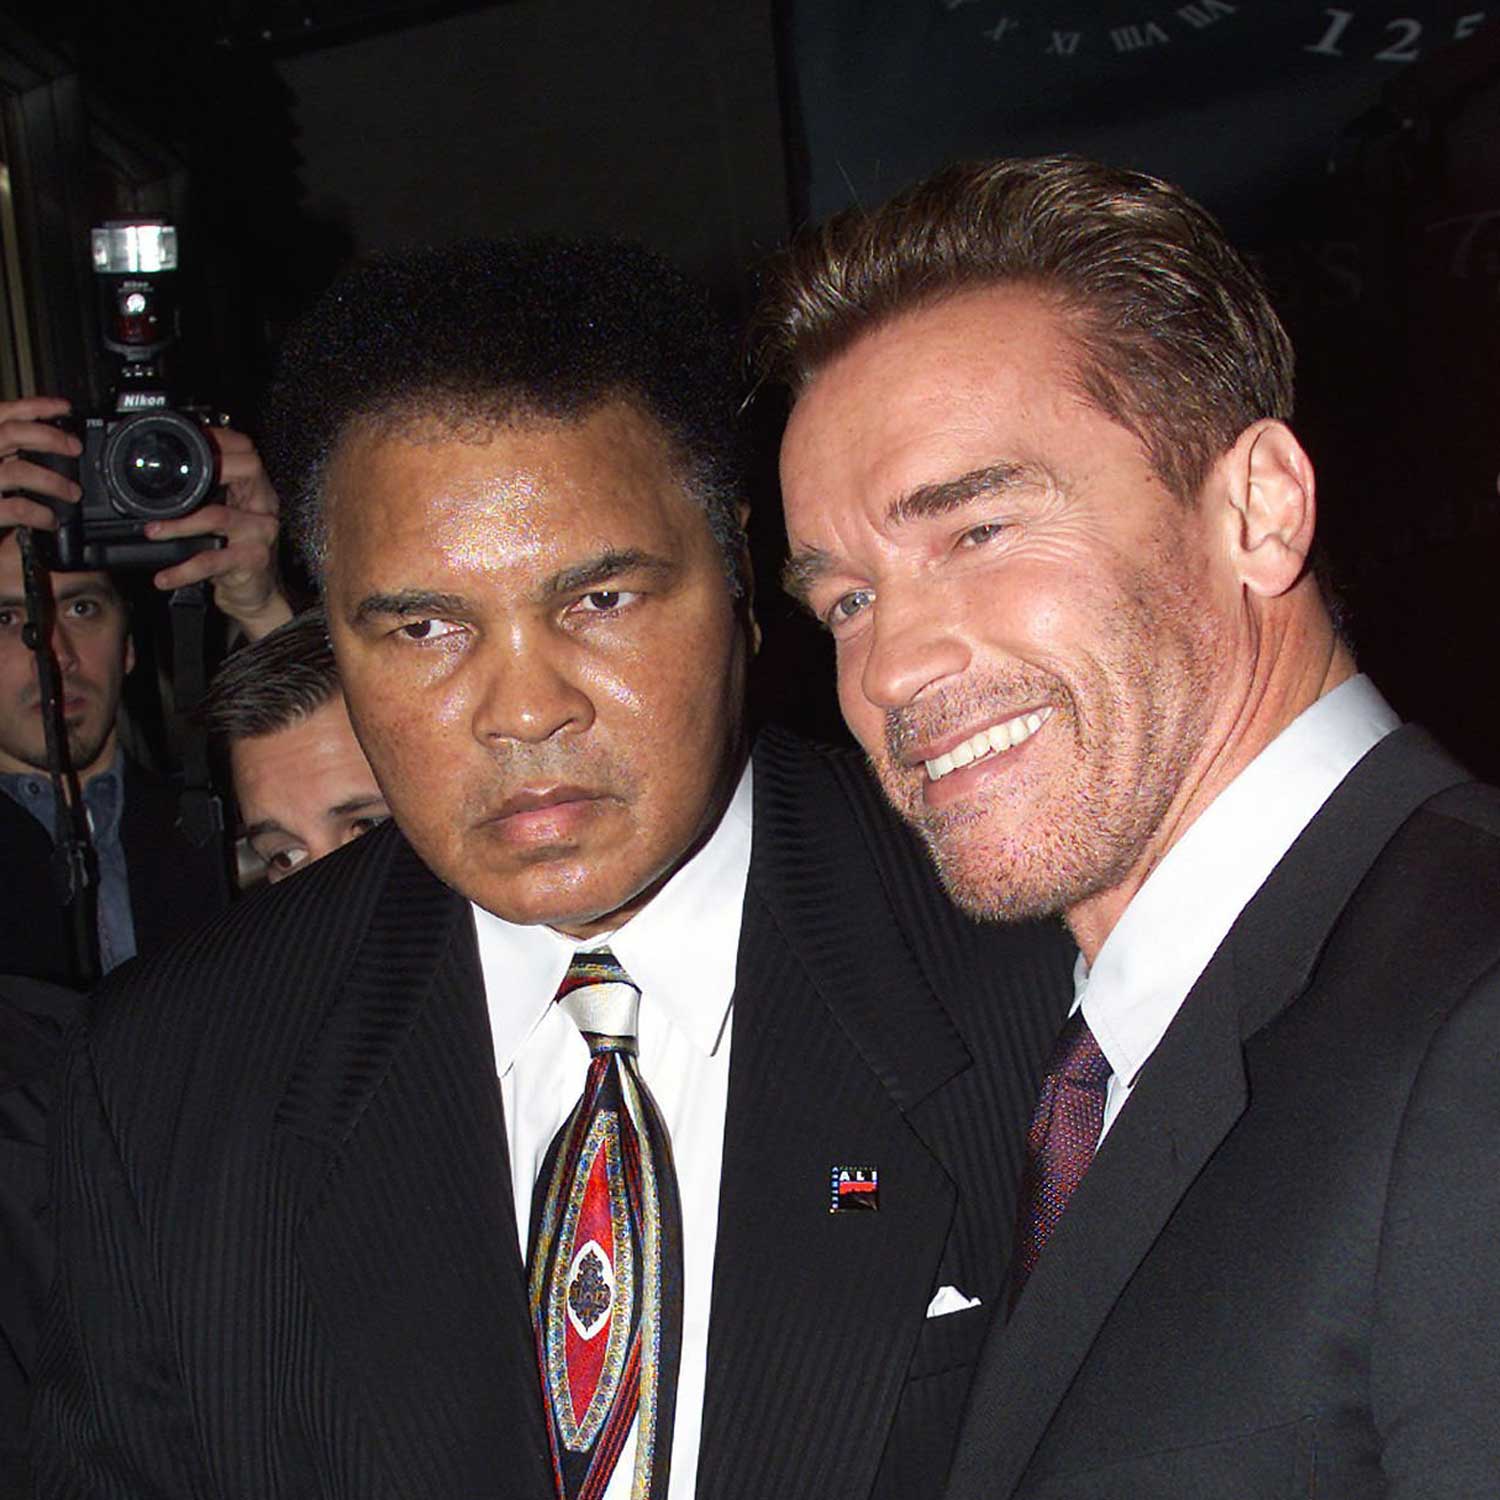 Muhammad Ali & Arnold Schwarzenegger at Audemars Piguet's Time To Give Celebrity Watch Auction For Charity, held at Christie's Auction House in New York City, 2000. (Image: Nick Elgar/ImageDirect)